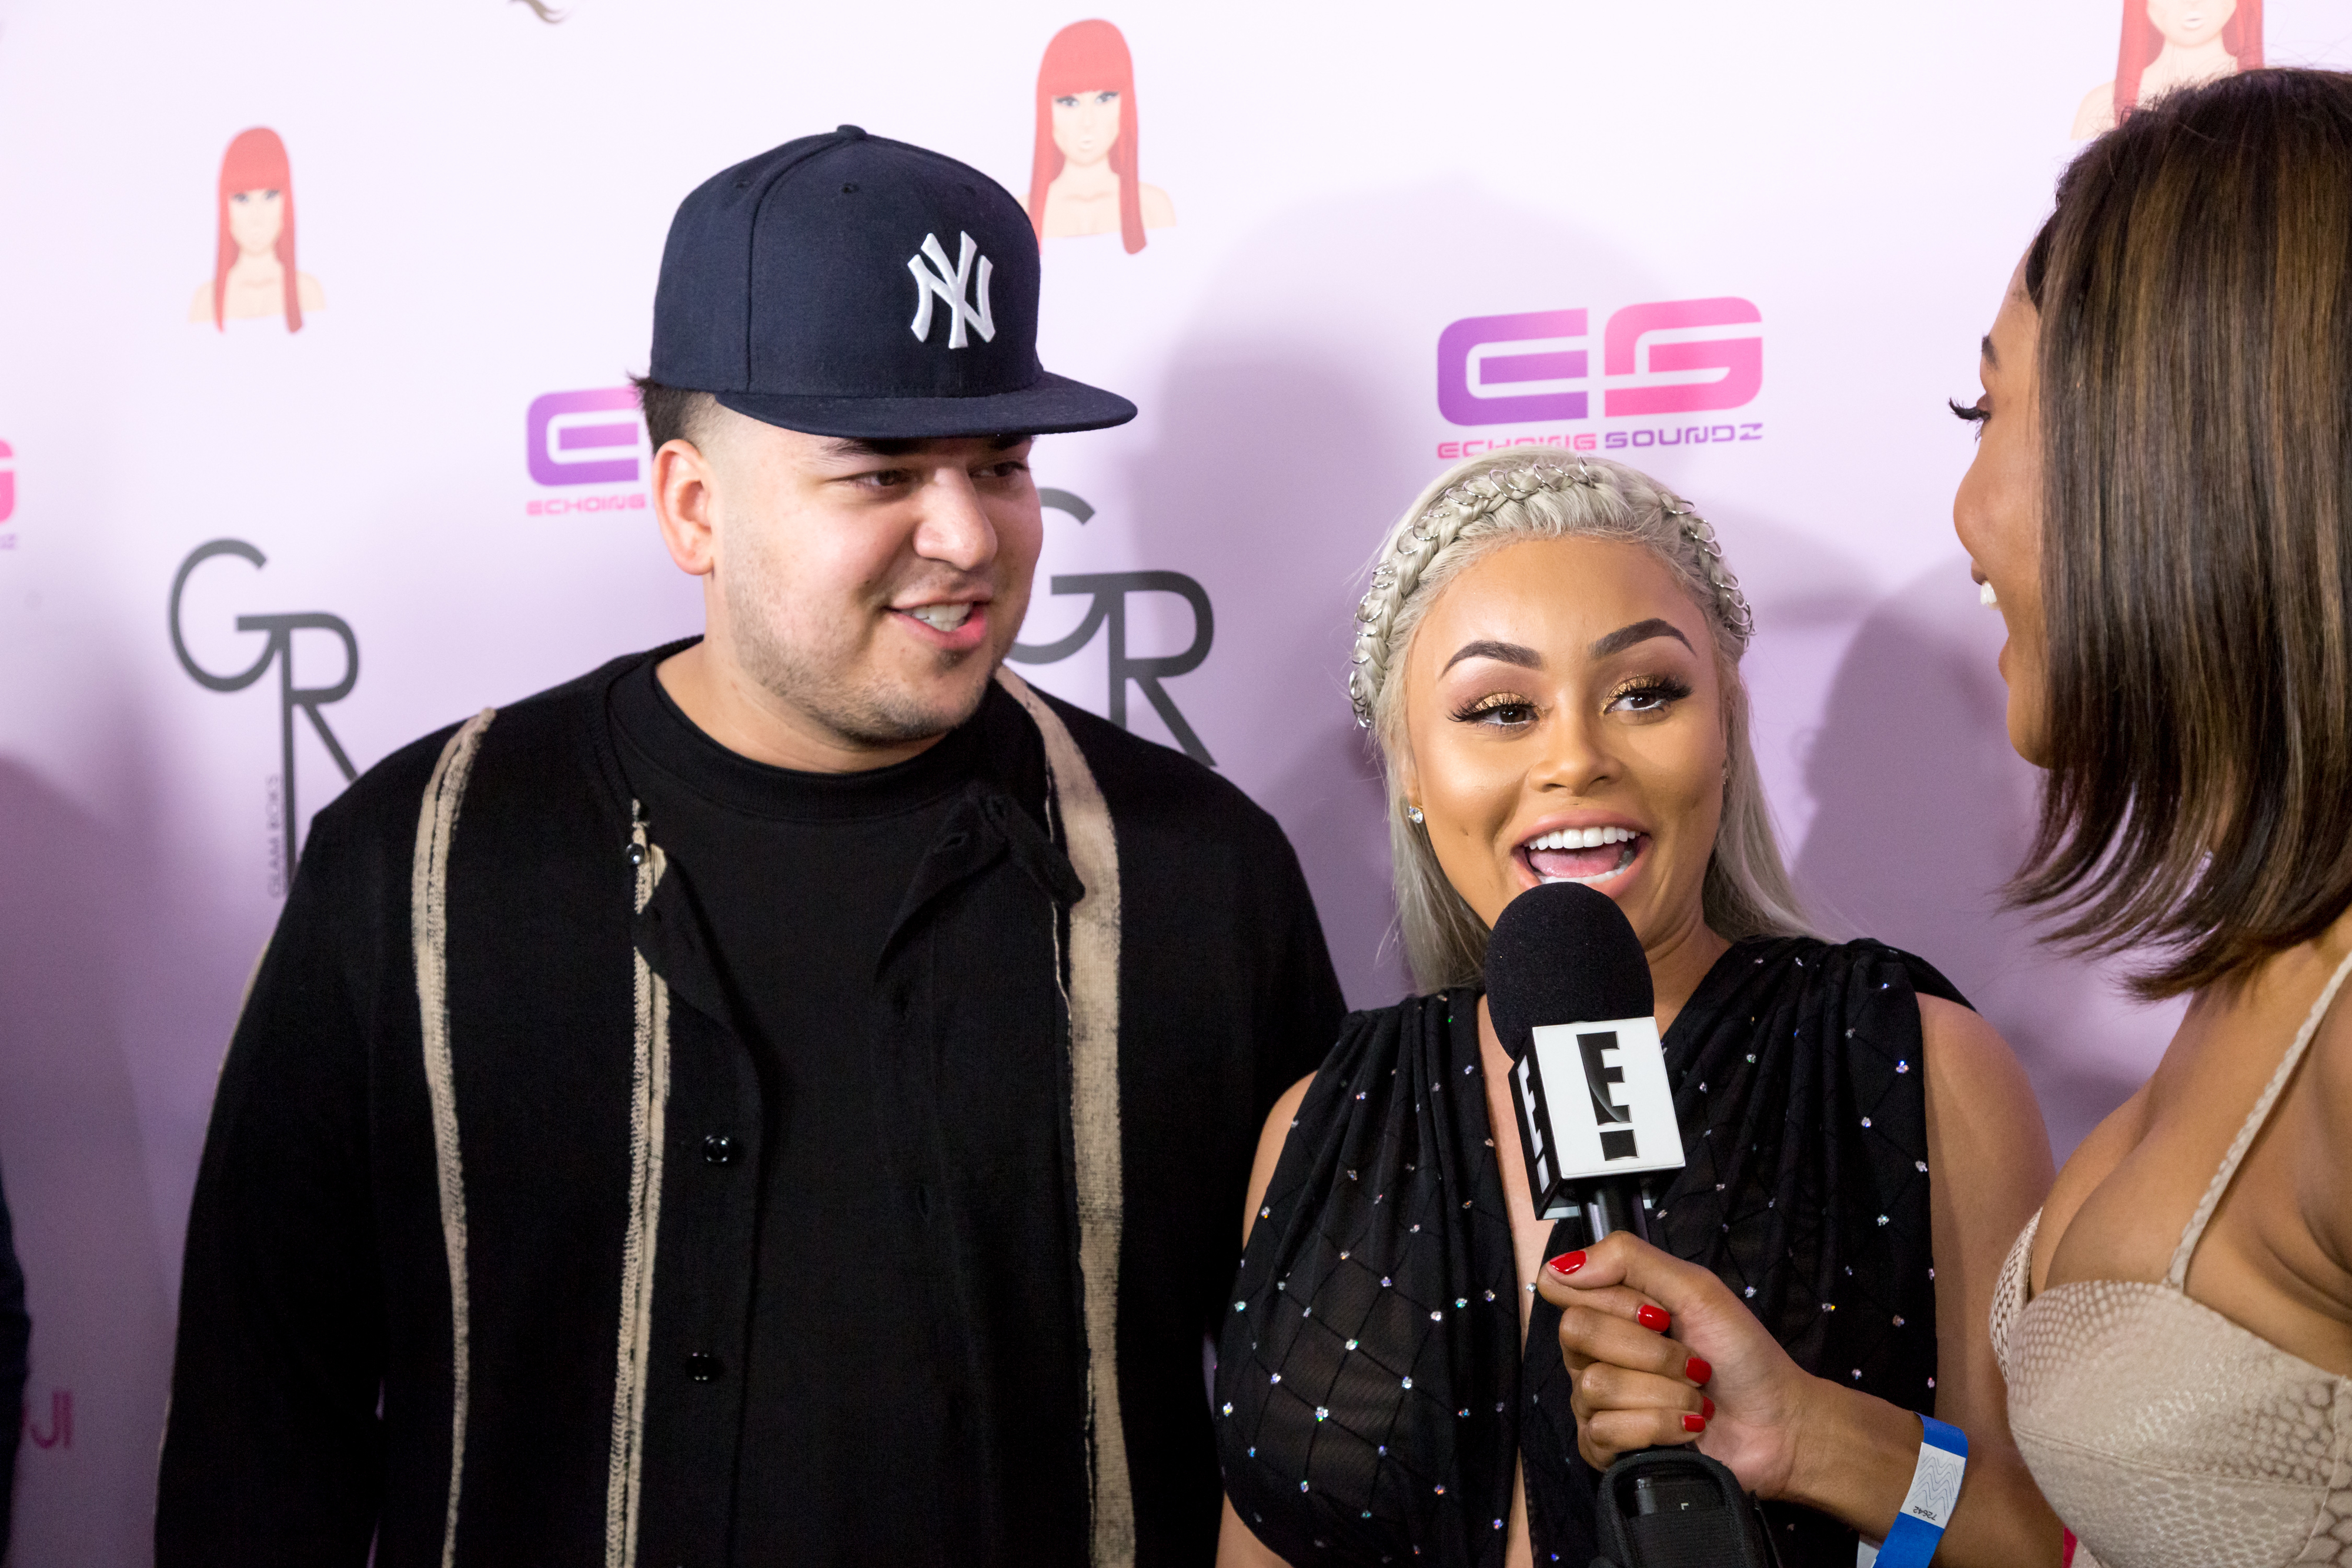 Close-up of Rob and Blac Chyna at a media event